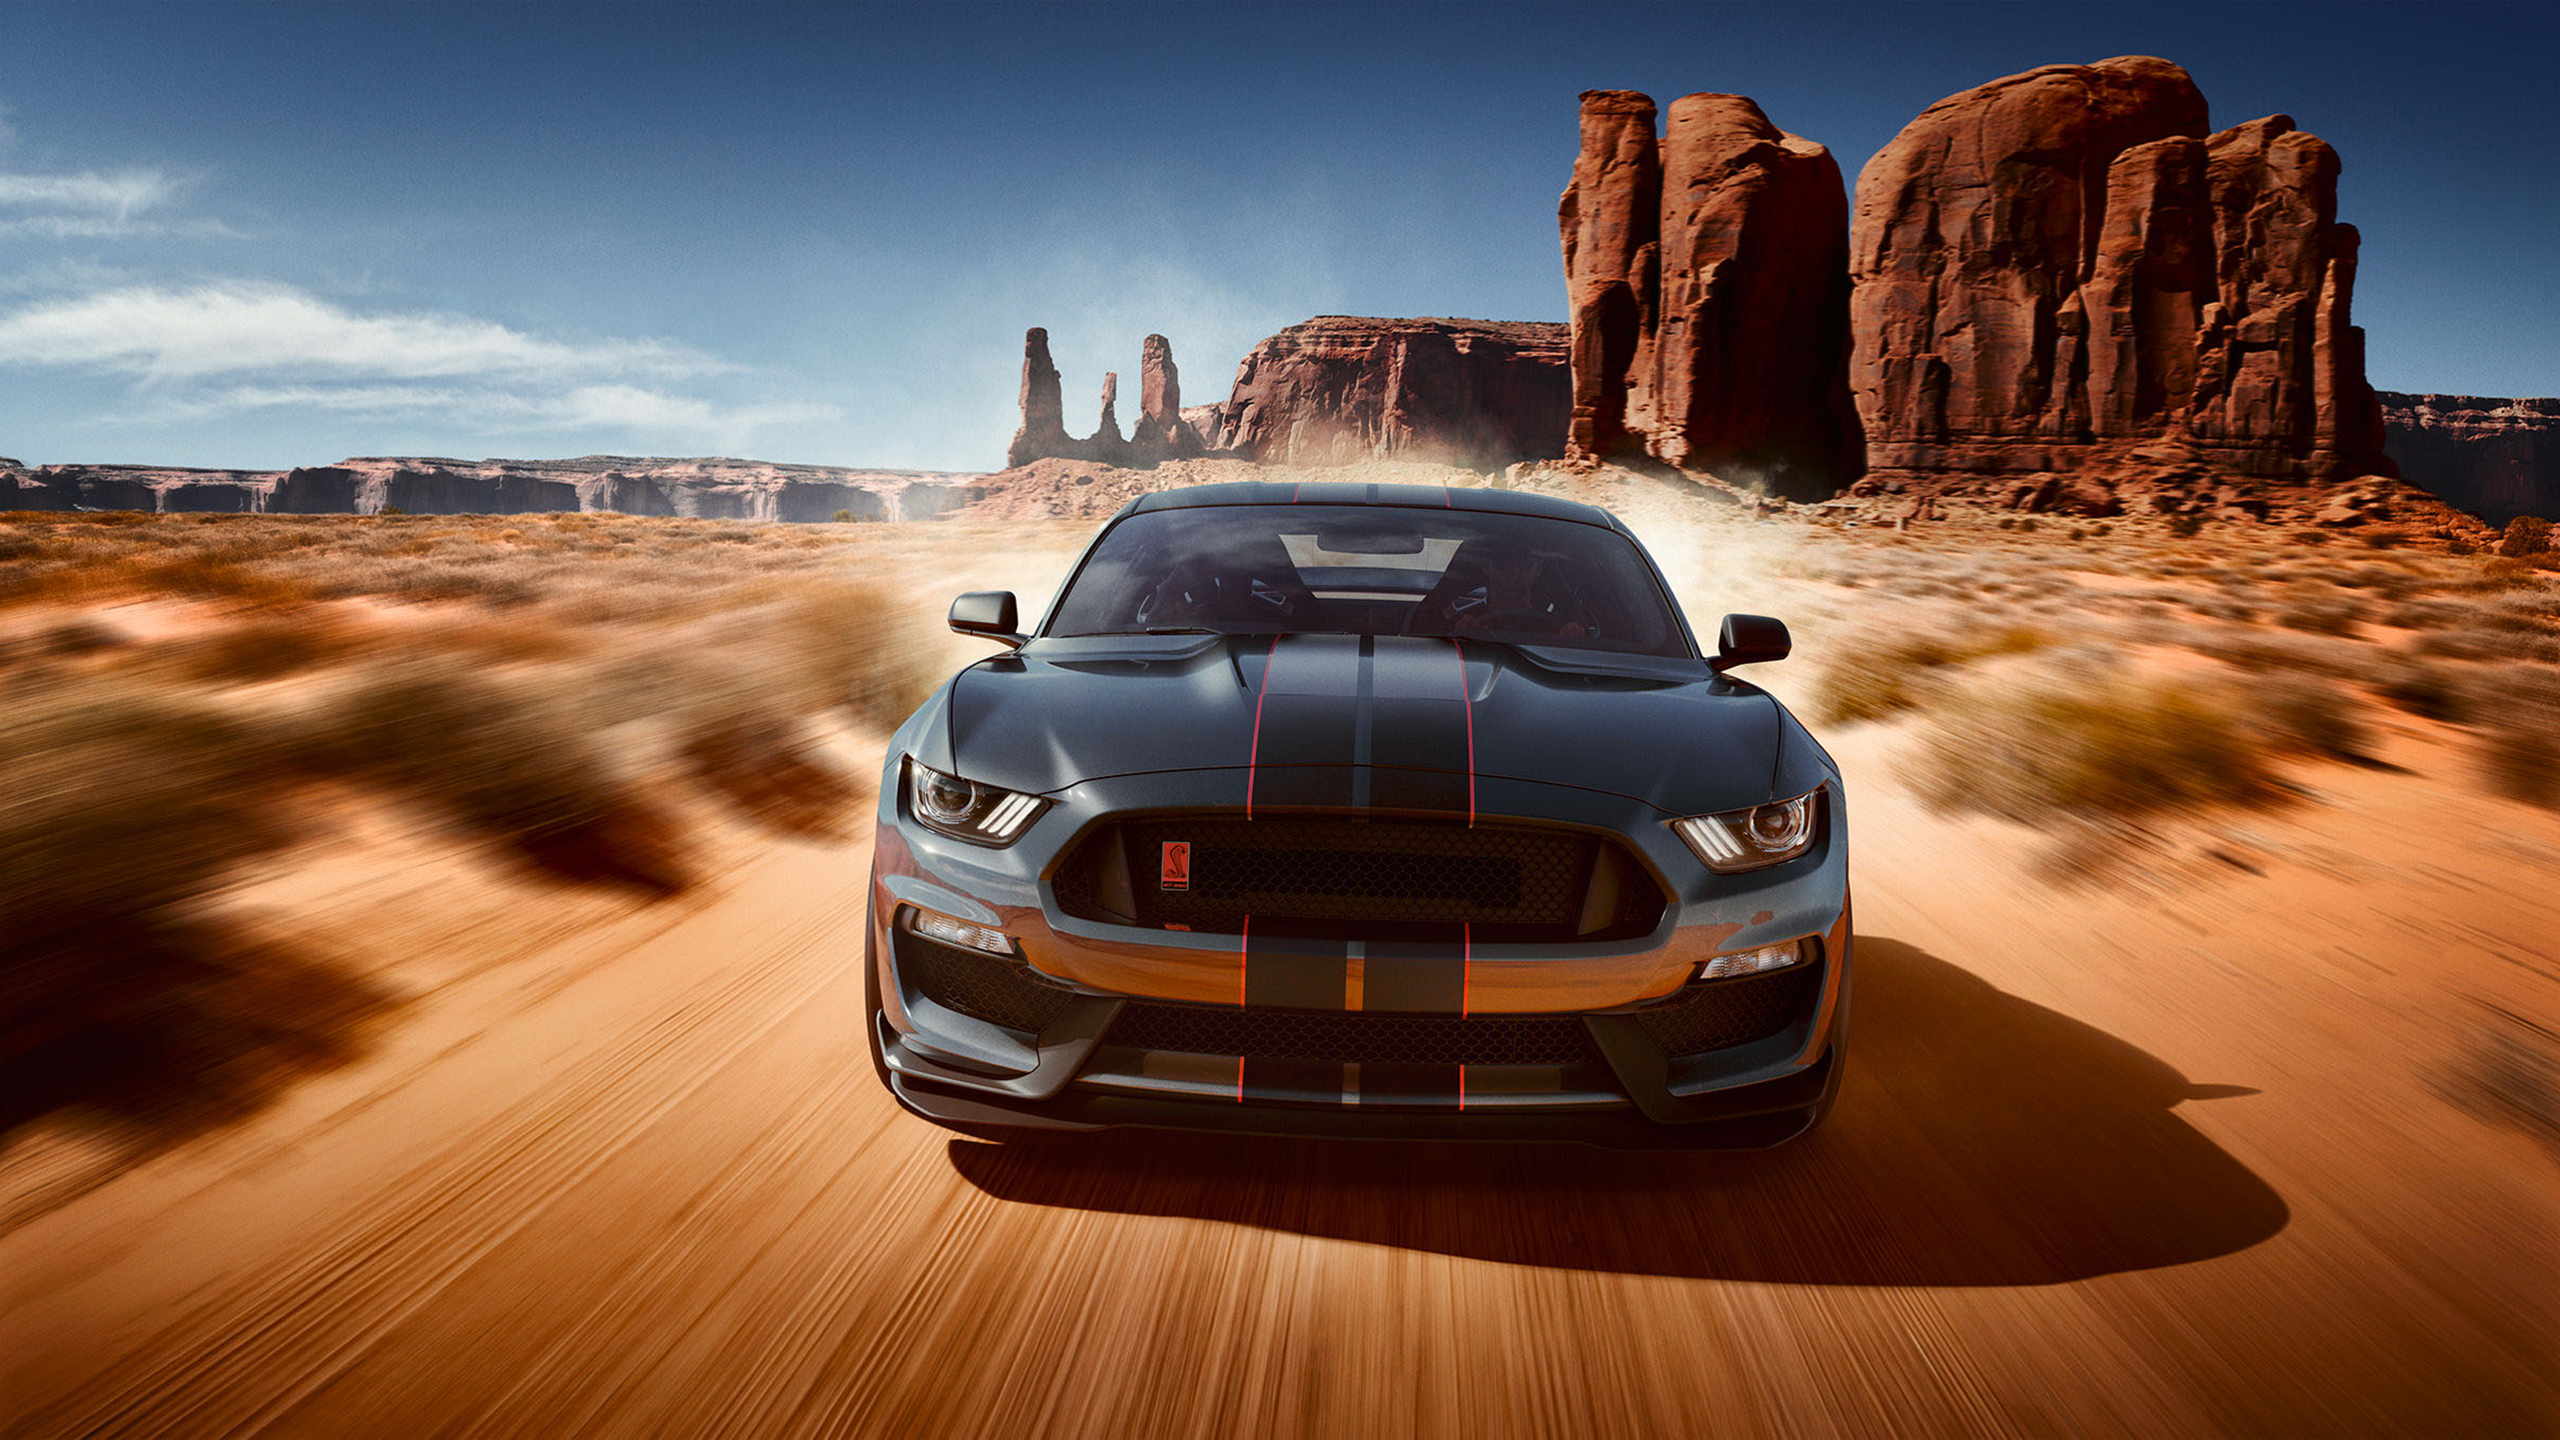 Ford Mustang Shelby GT350 Wallpapers